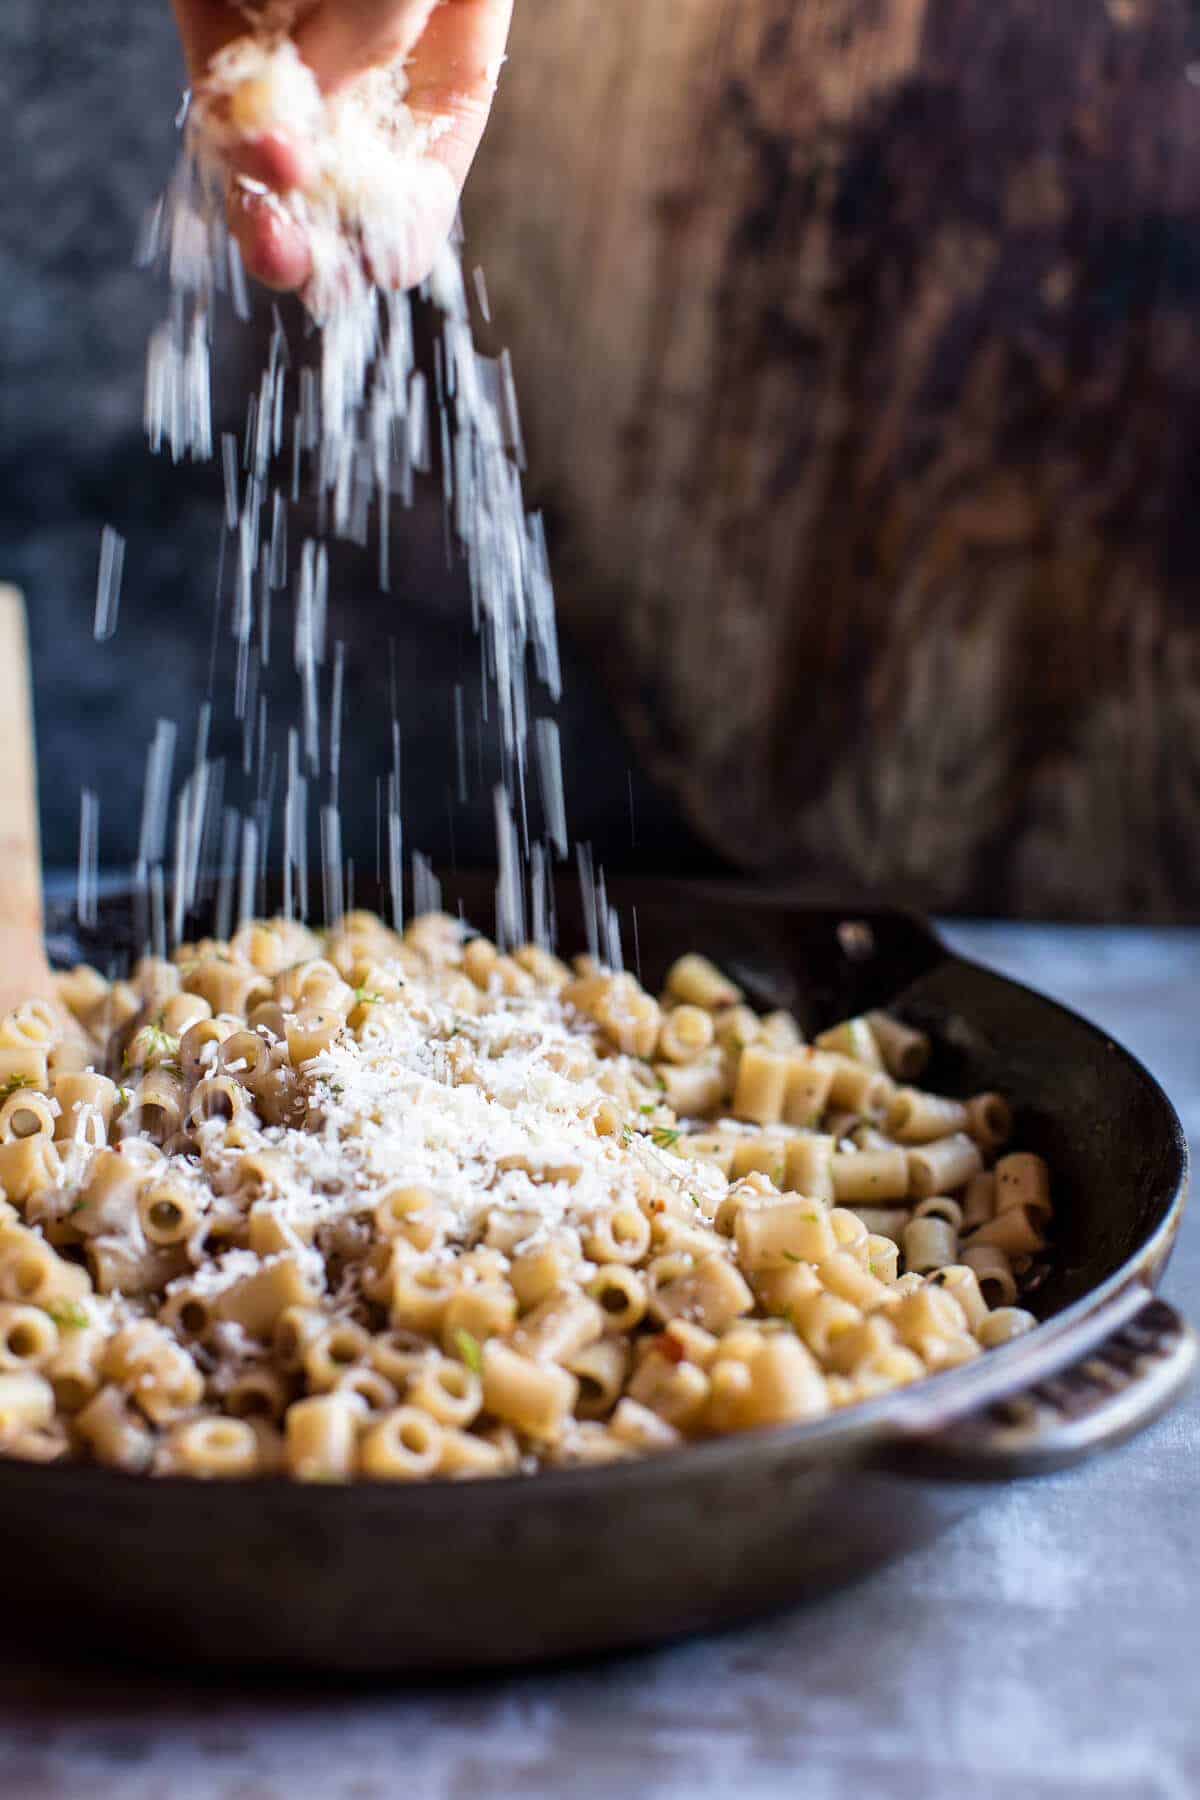 Quick + Simple Pasta “Risotto” with Herbed Roasted Chickpeas | halfbakedharvest.com @hbharvest